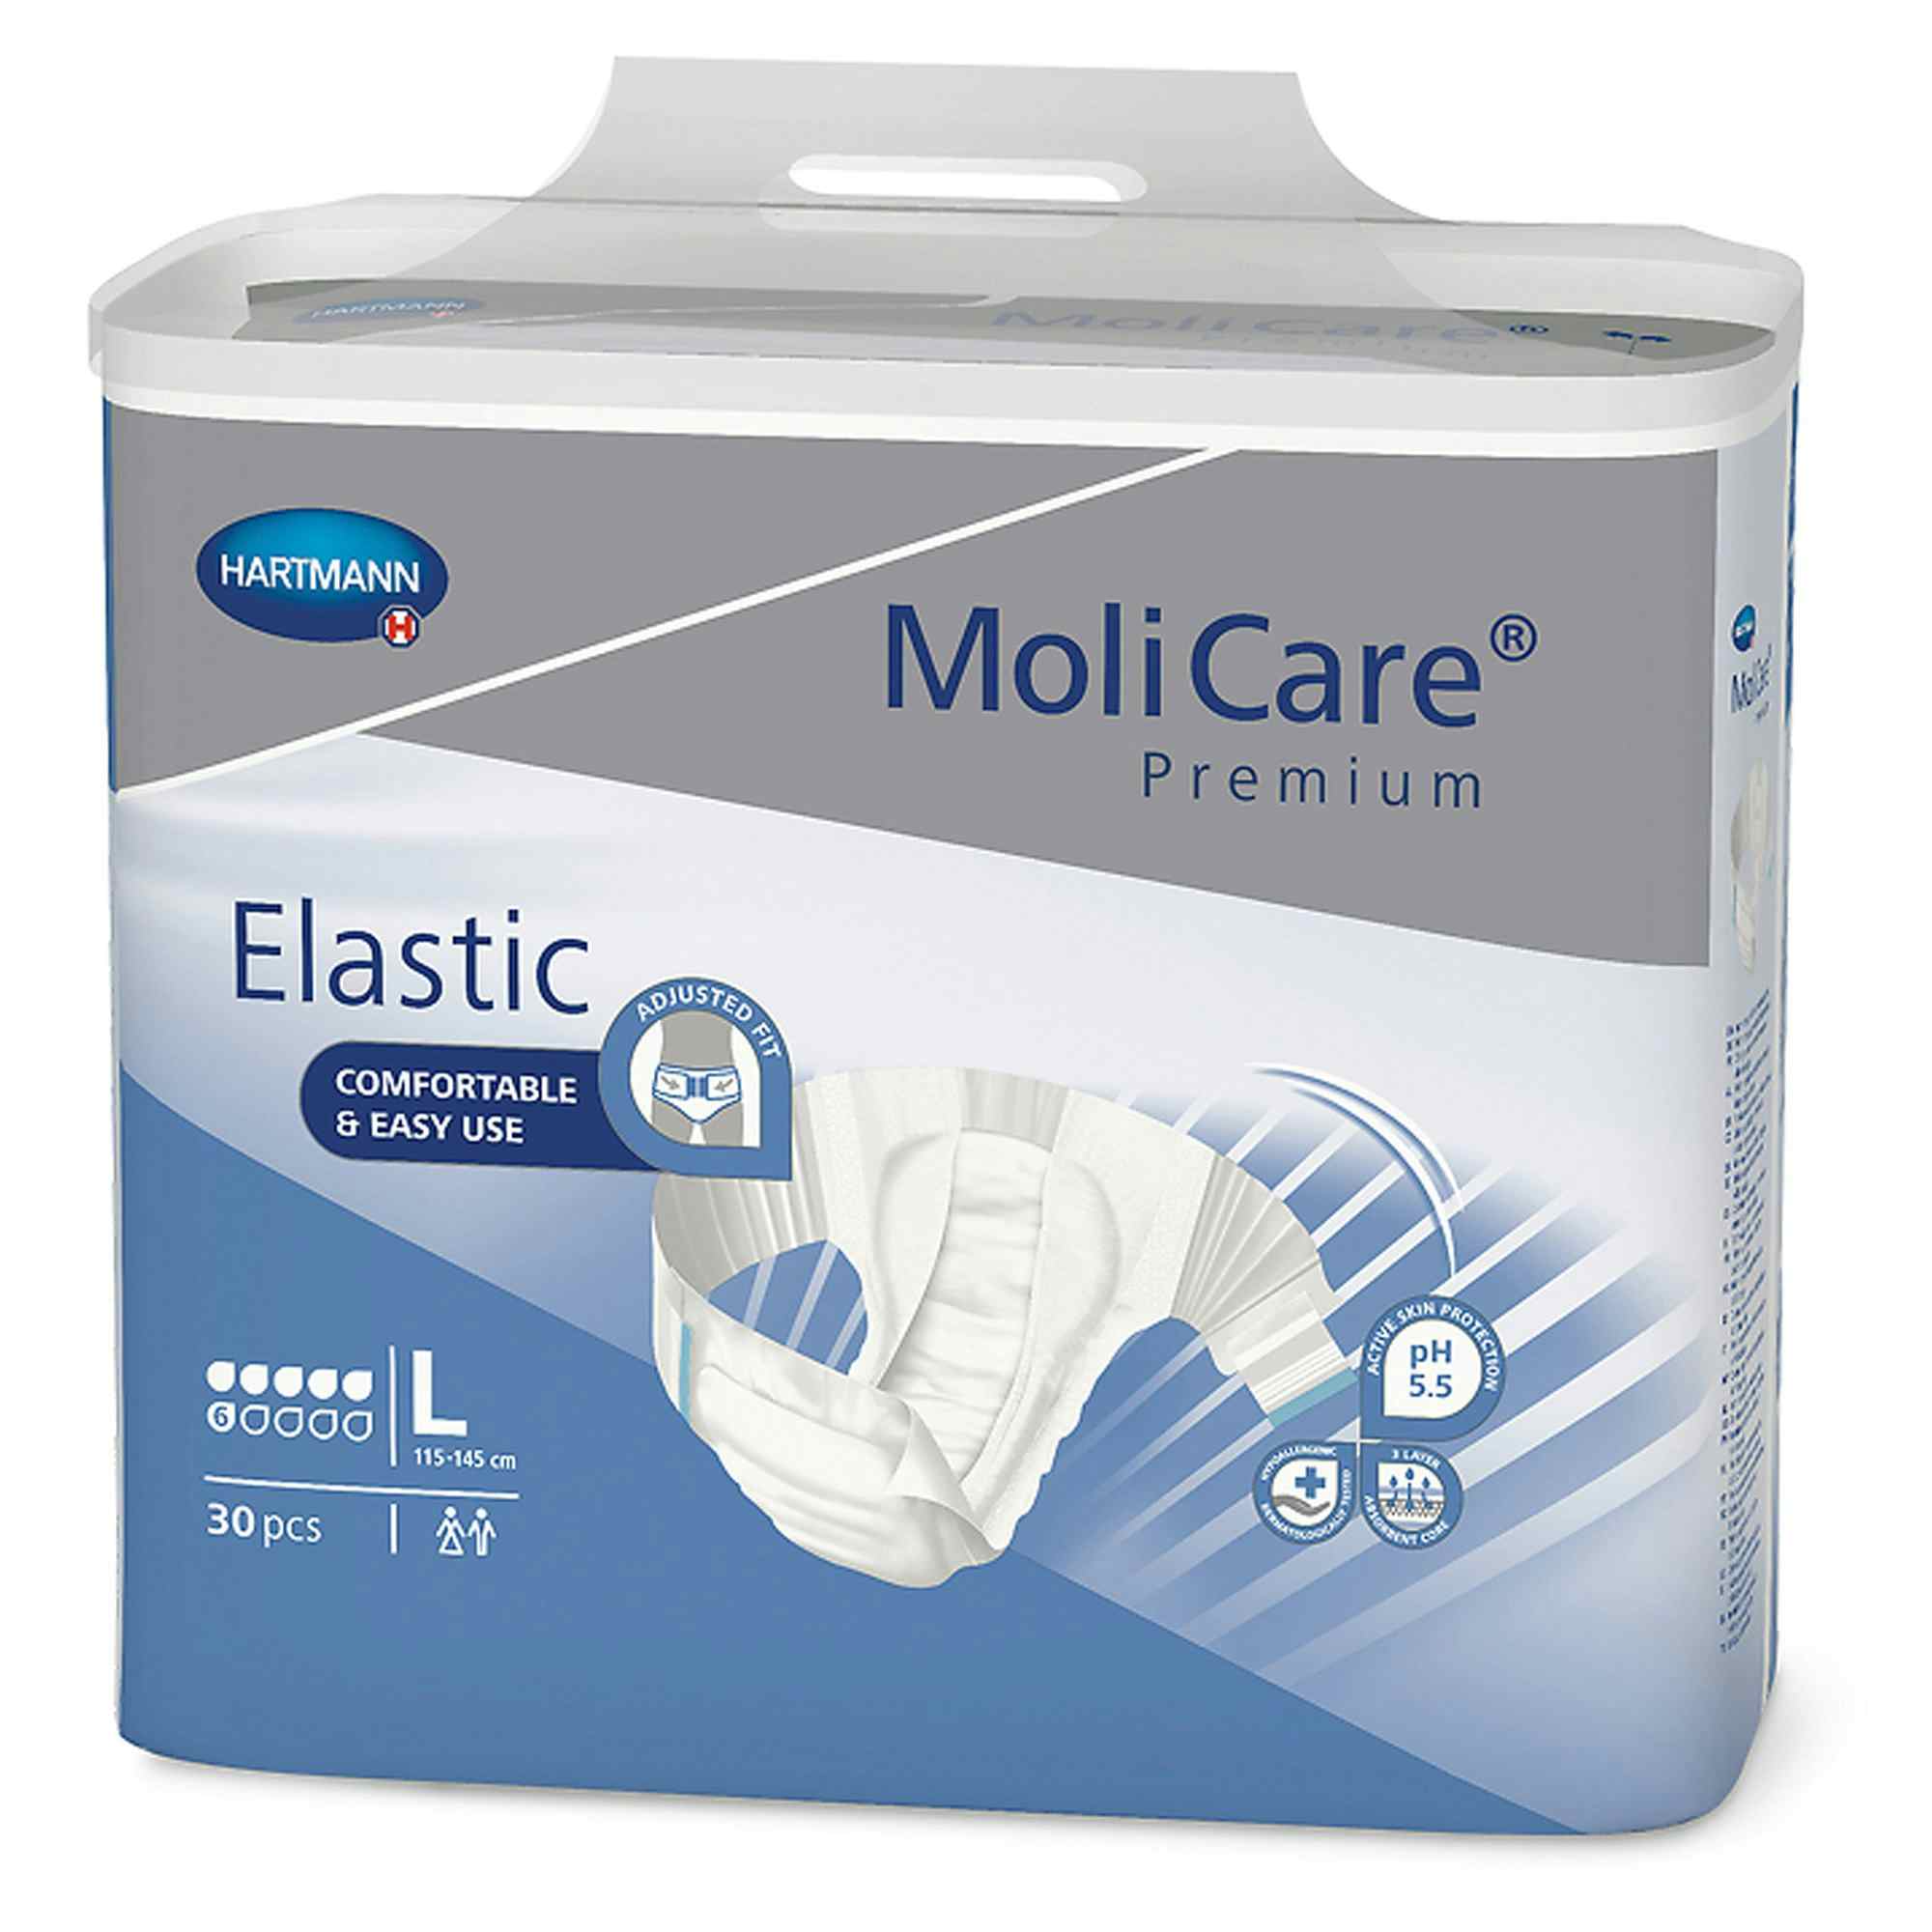 MoliCare Premium Elastic 6D Disposable Brief Adult Diapers with Tabs, Moderate Absorbency, 165273, Large (45-57") - Bag of 30